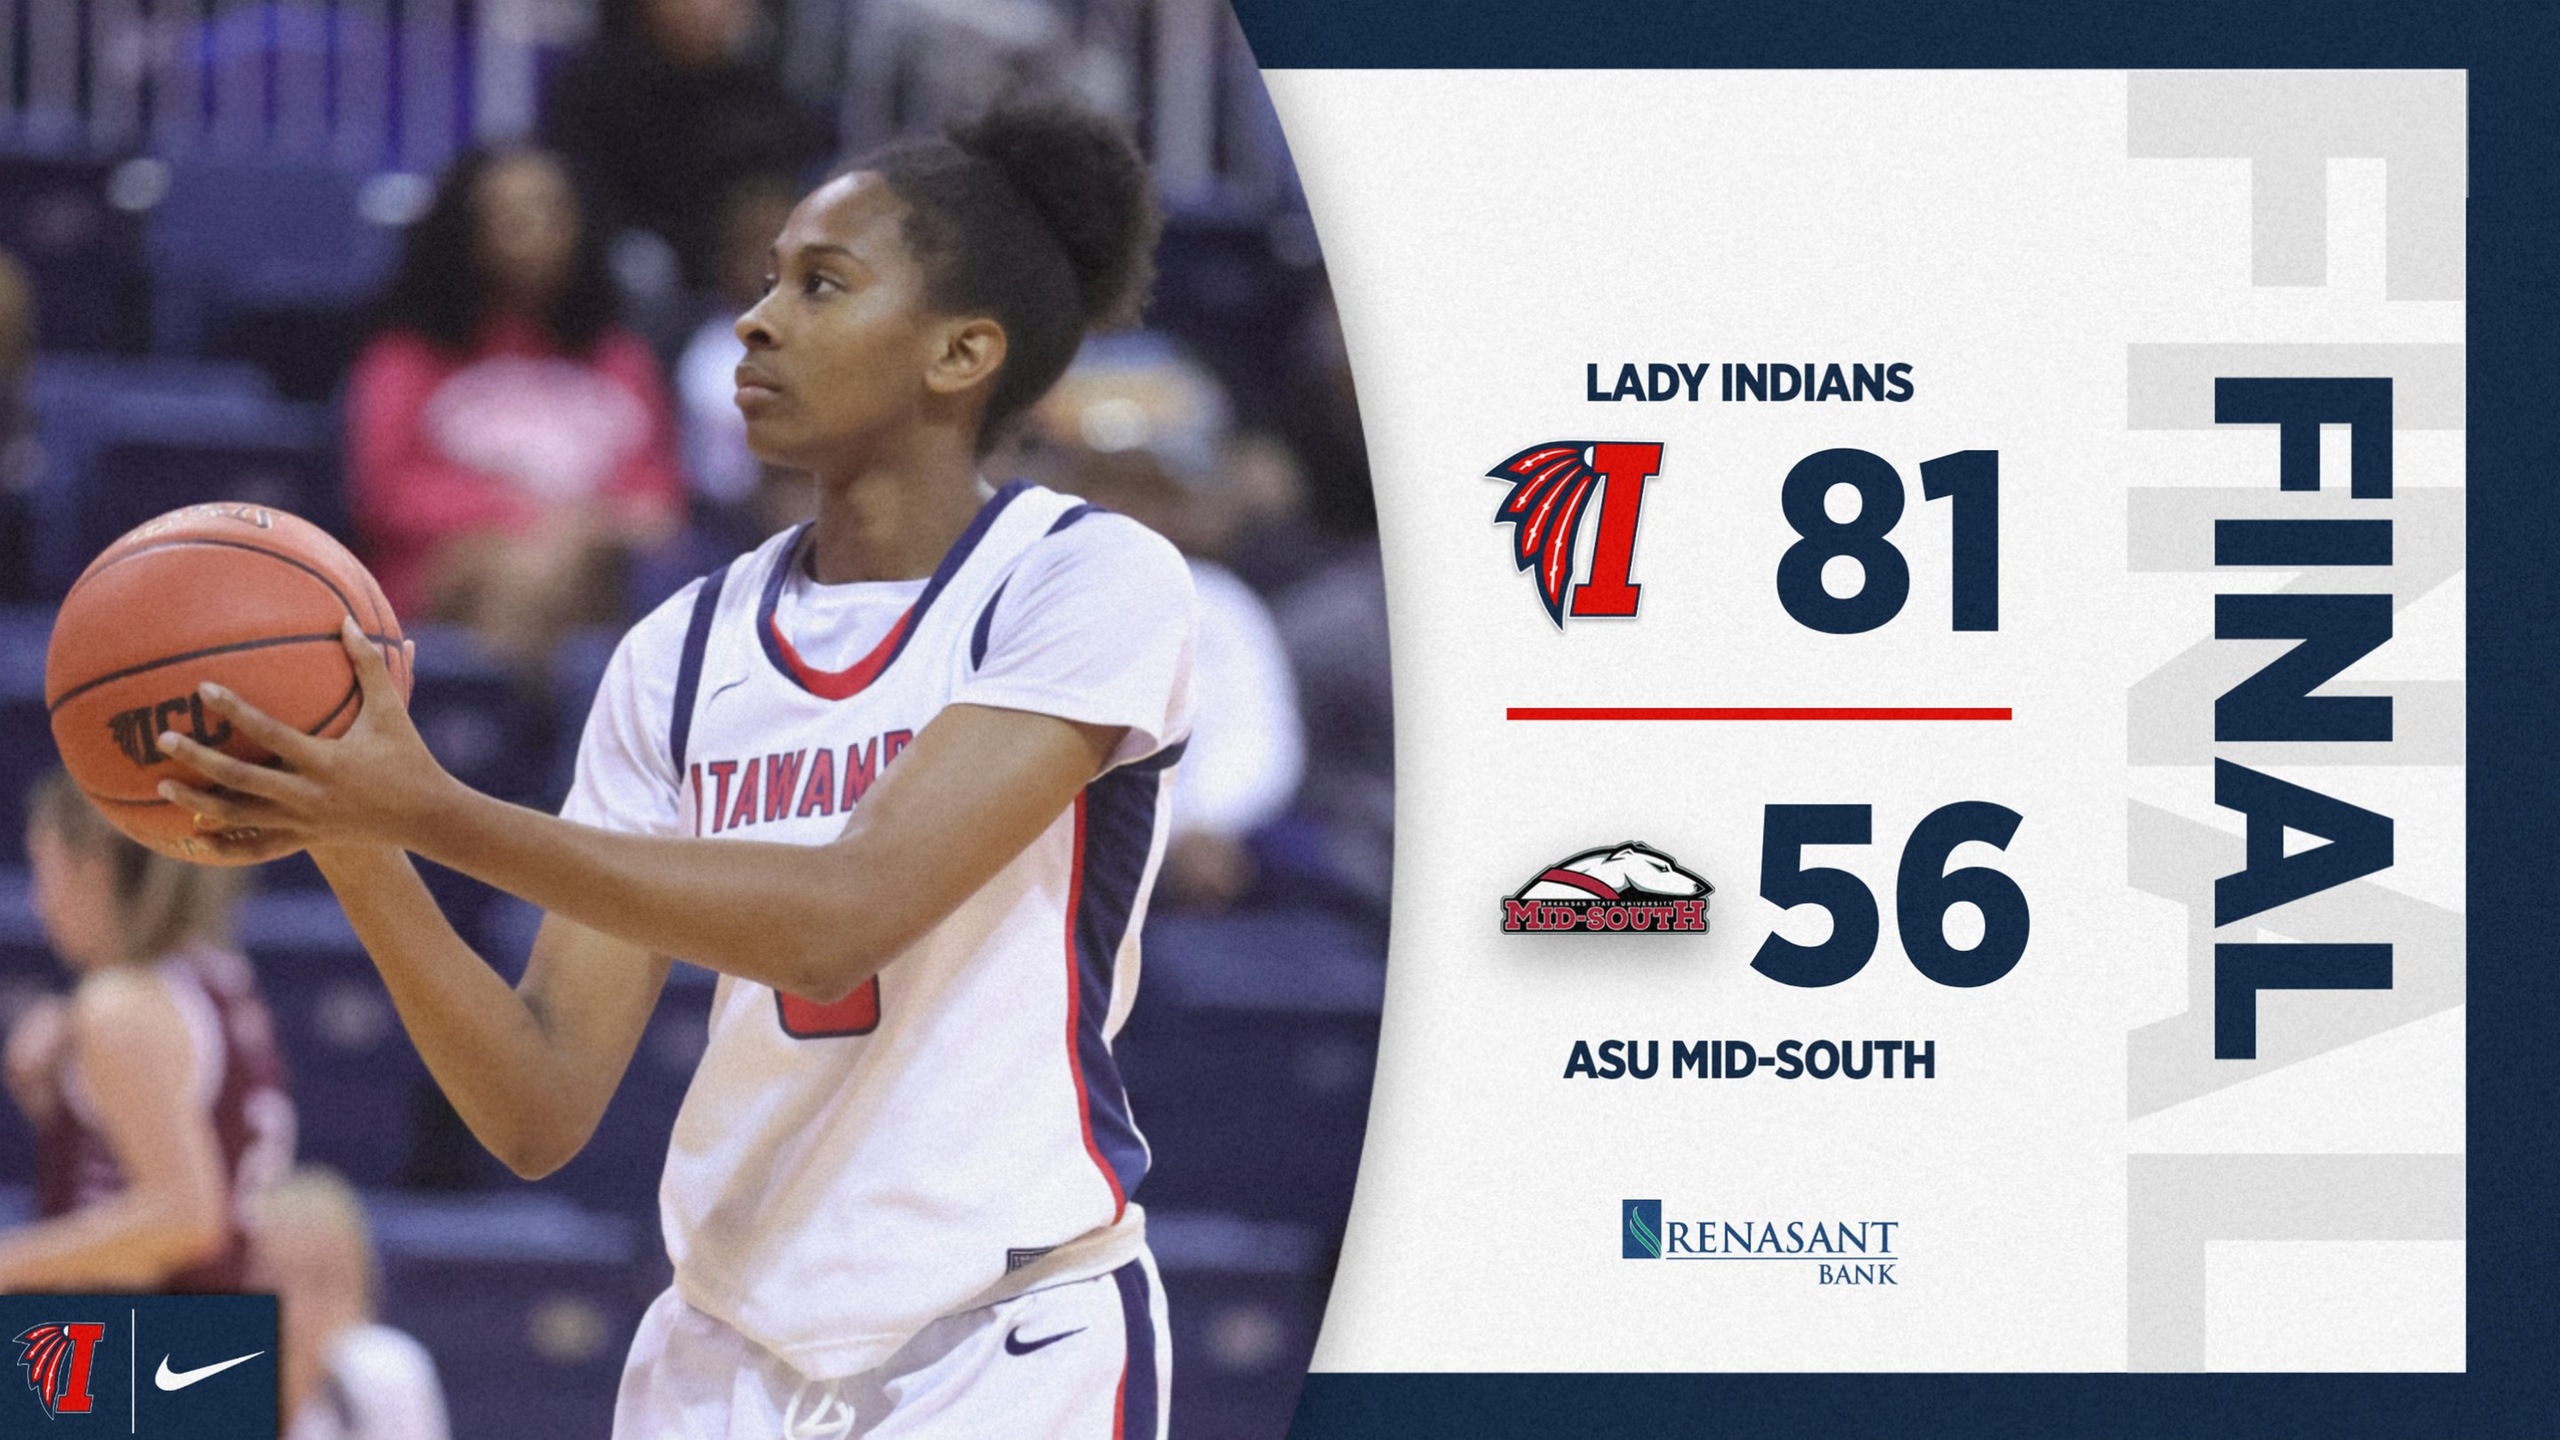 Lady Indians overcome slow start, win big over ASU Mid-South